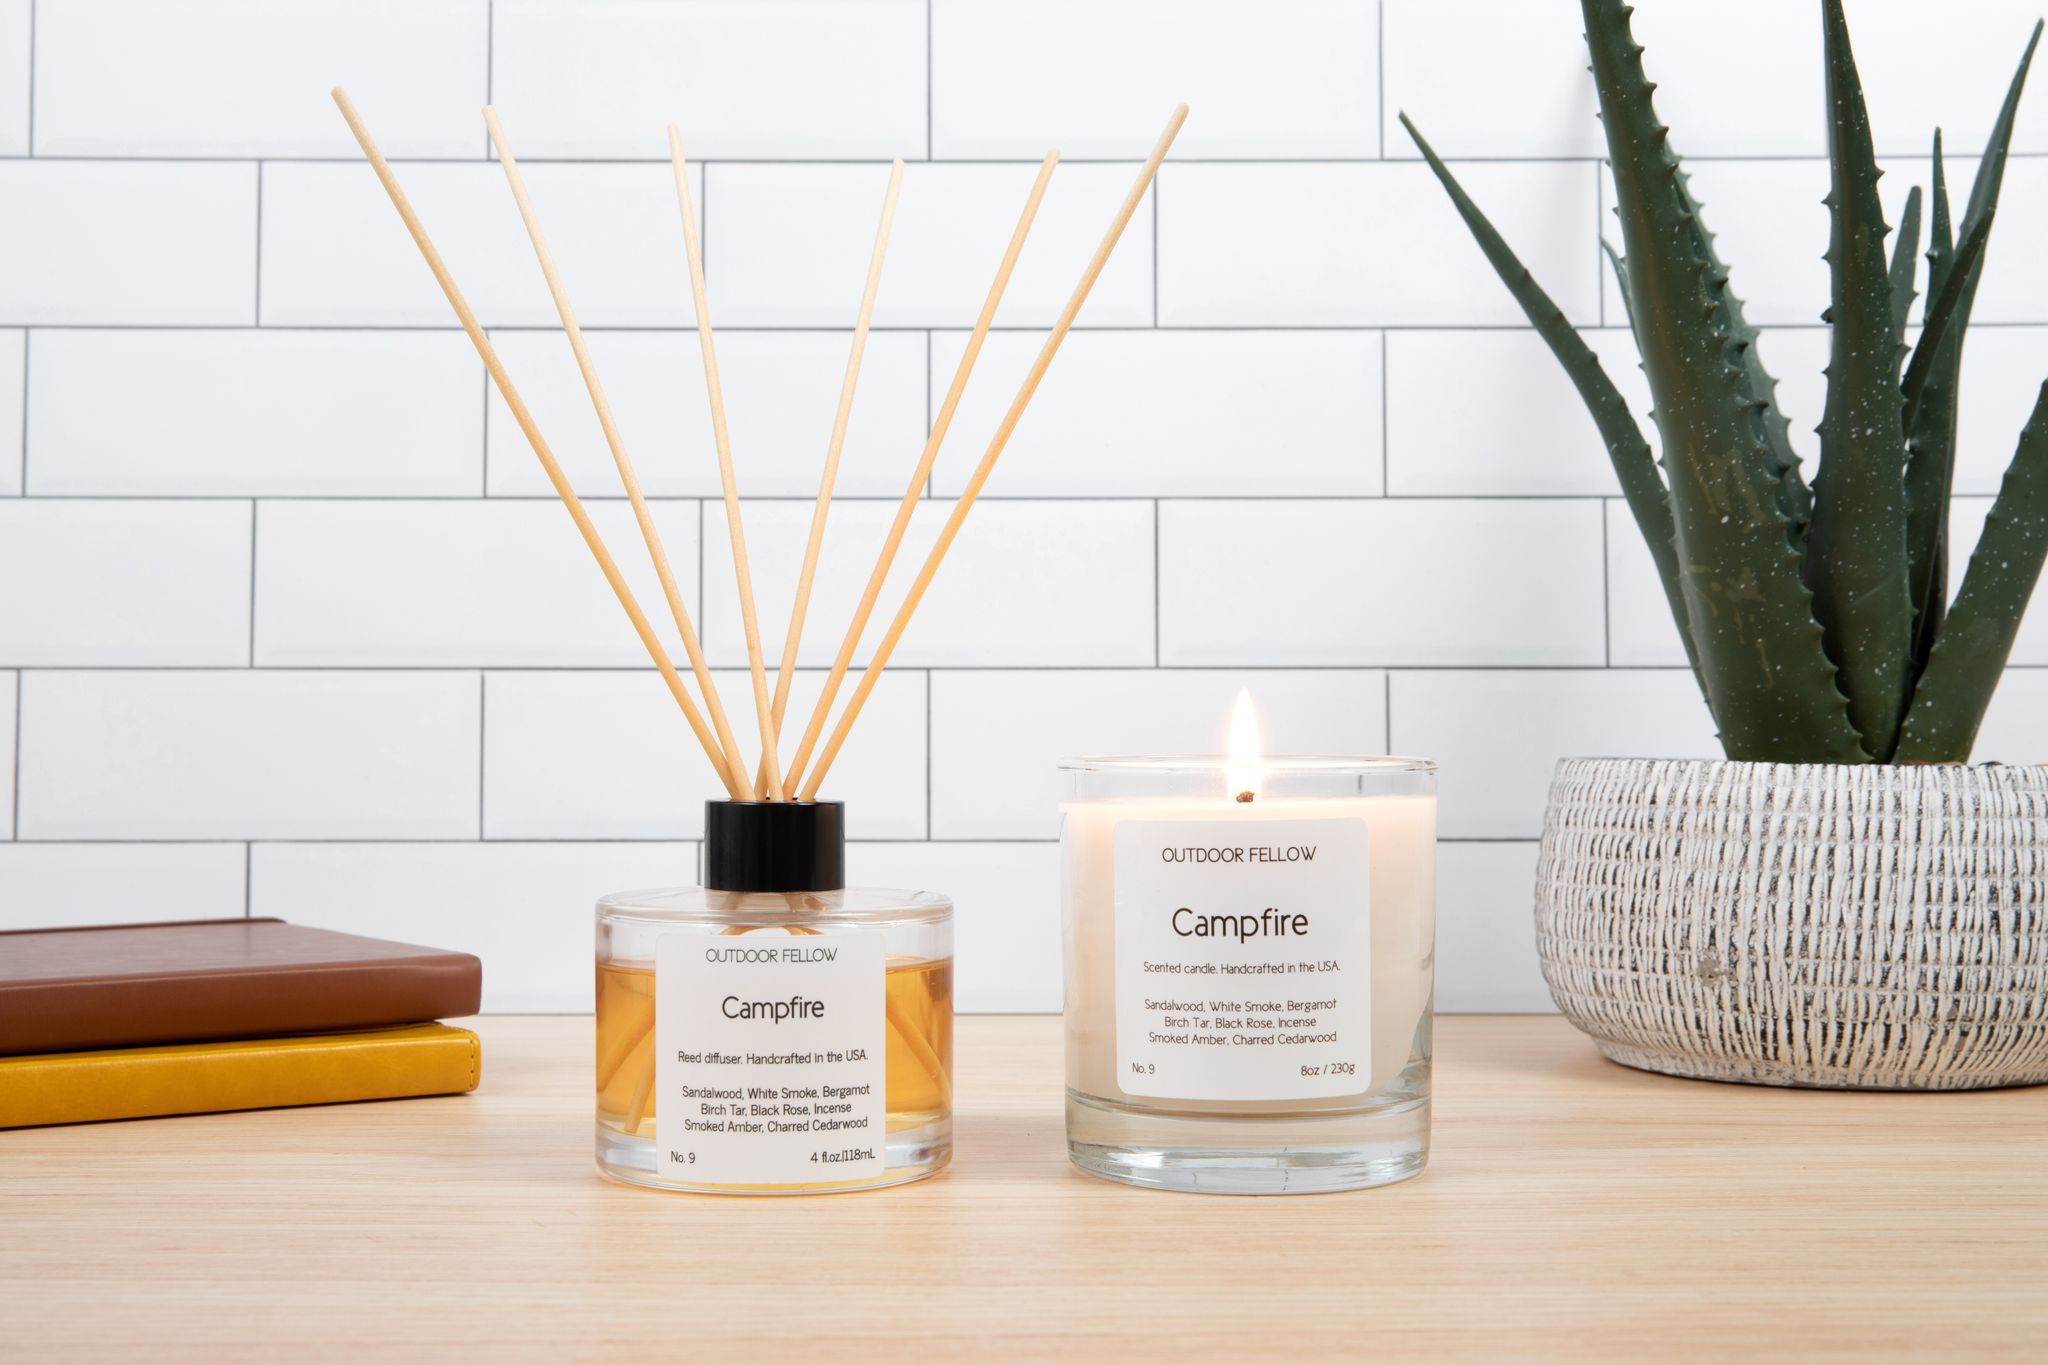 Campfire Reed Diffuser and Campfire Scented Candle next to each other on a desk